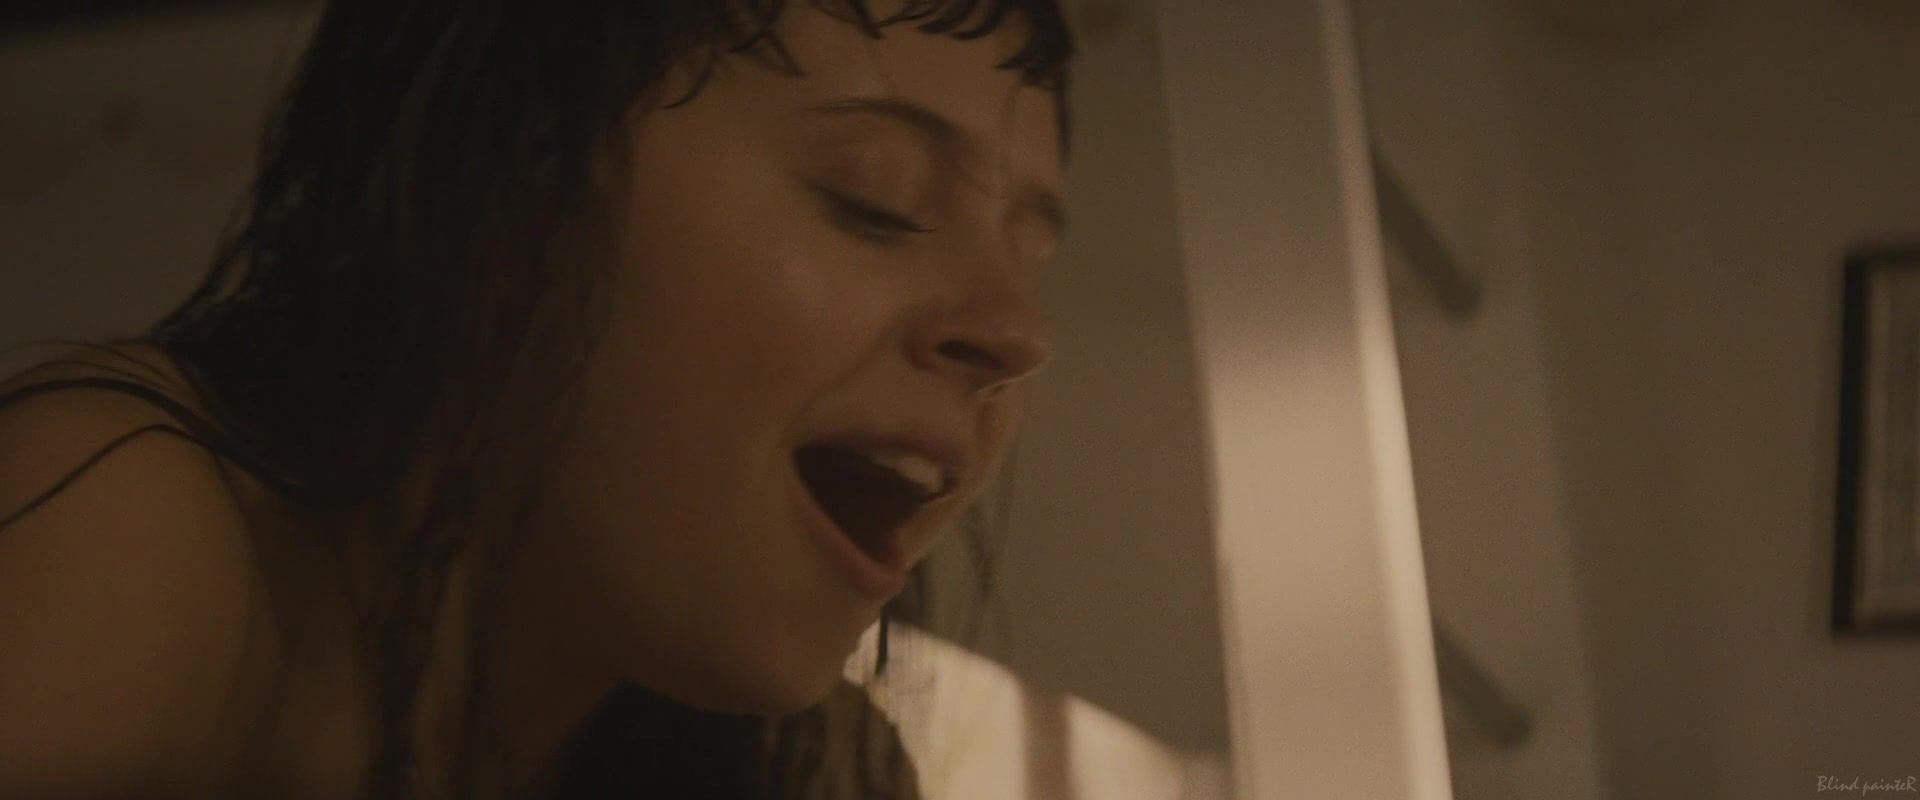 Gape Full Frontal and sex video | Celebrity Bel Powley nude from the movie "The Diary Of A Teenage Girl" (2015) Eat